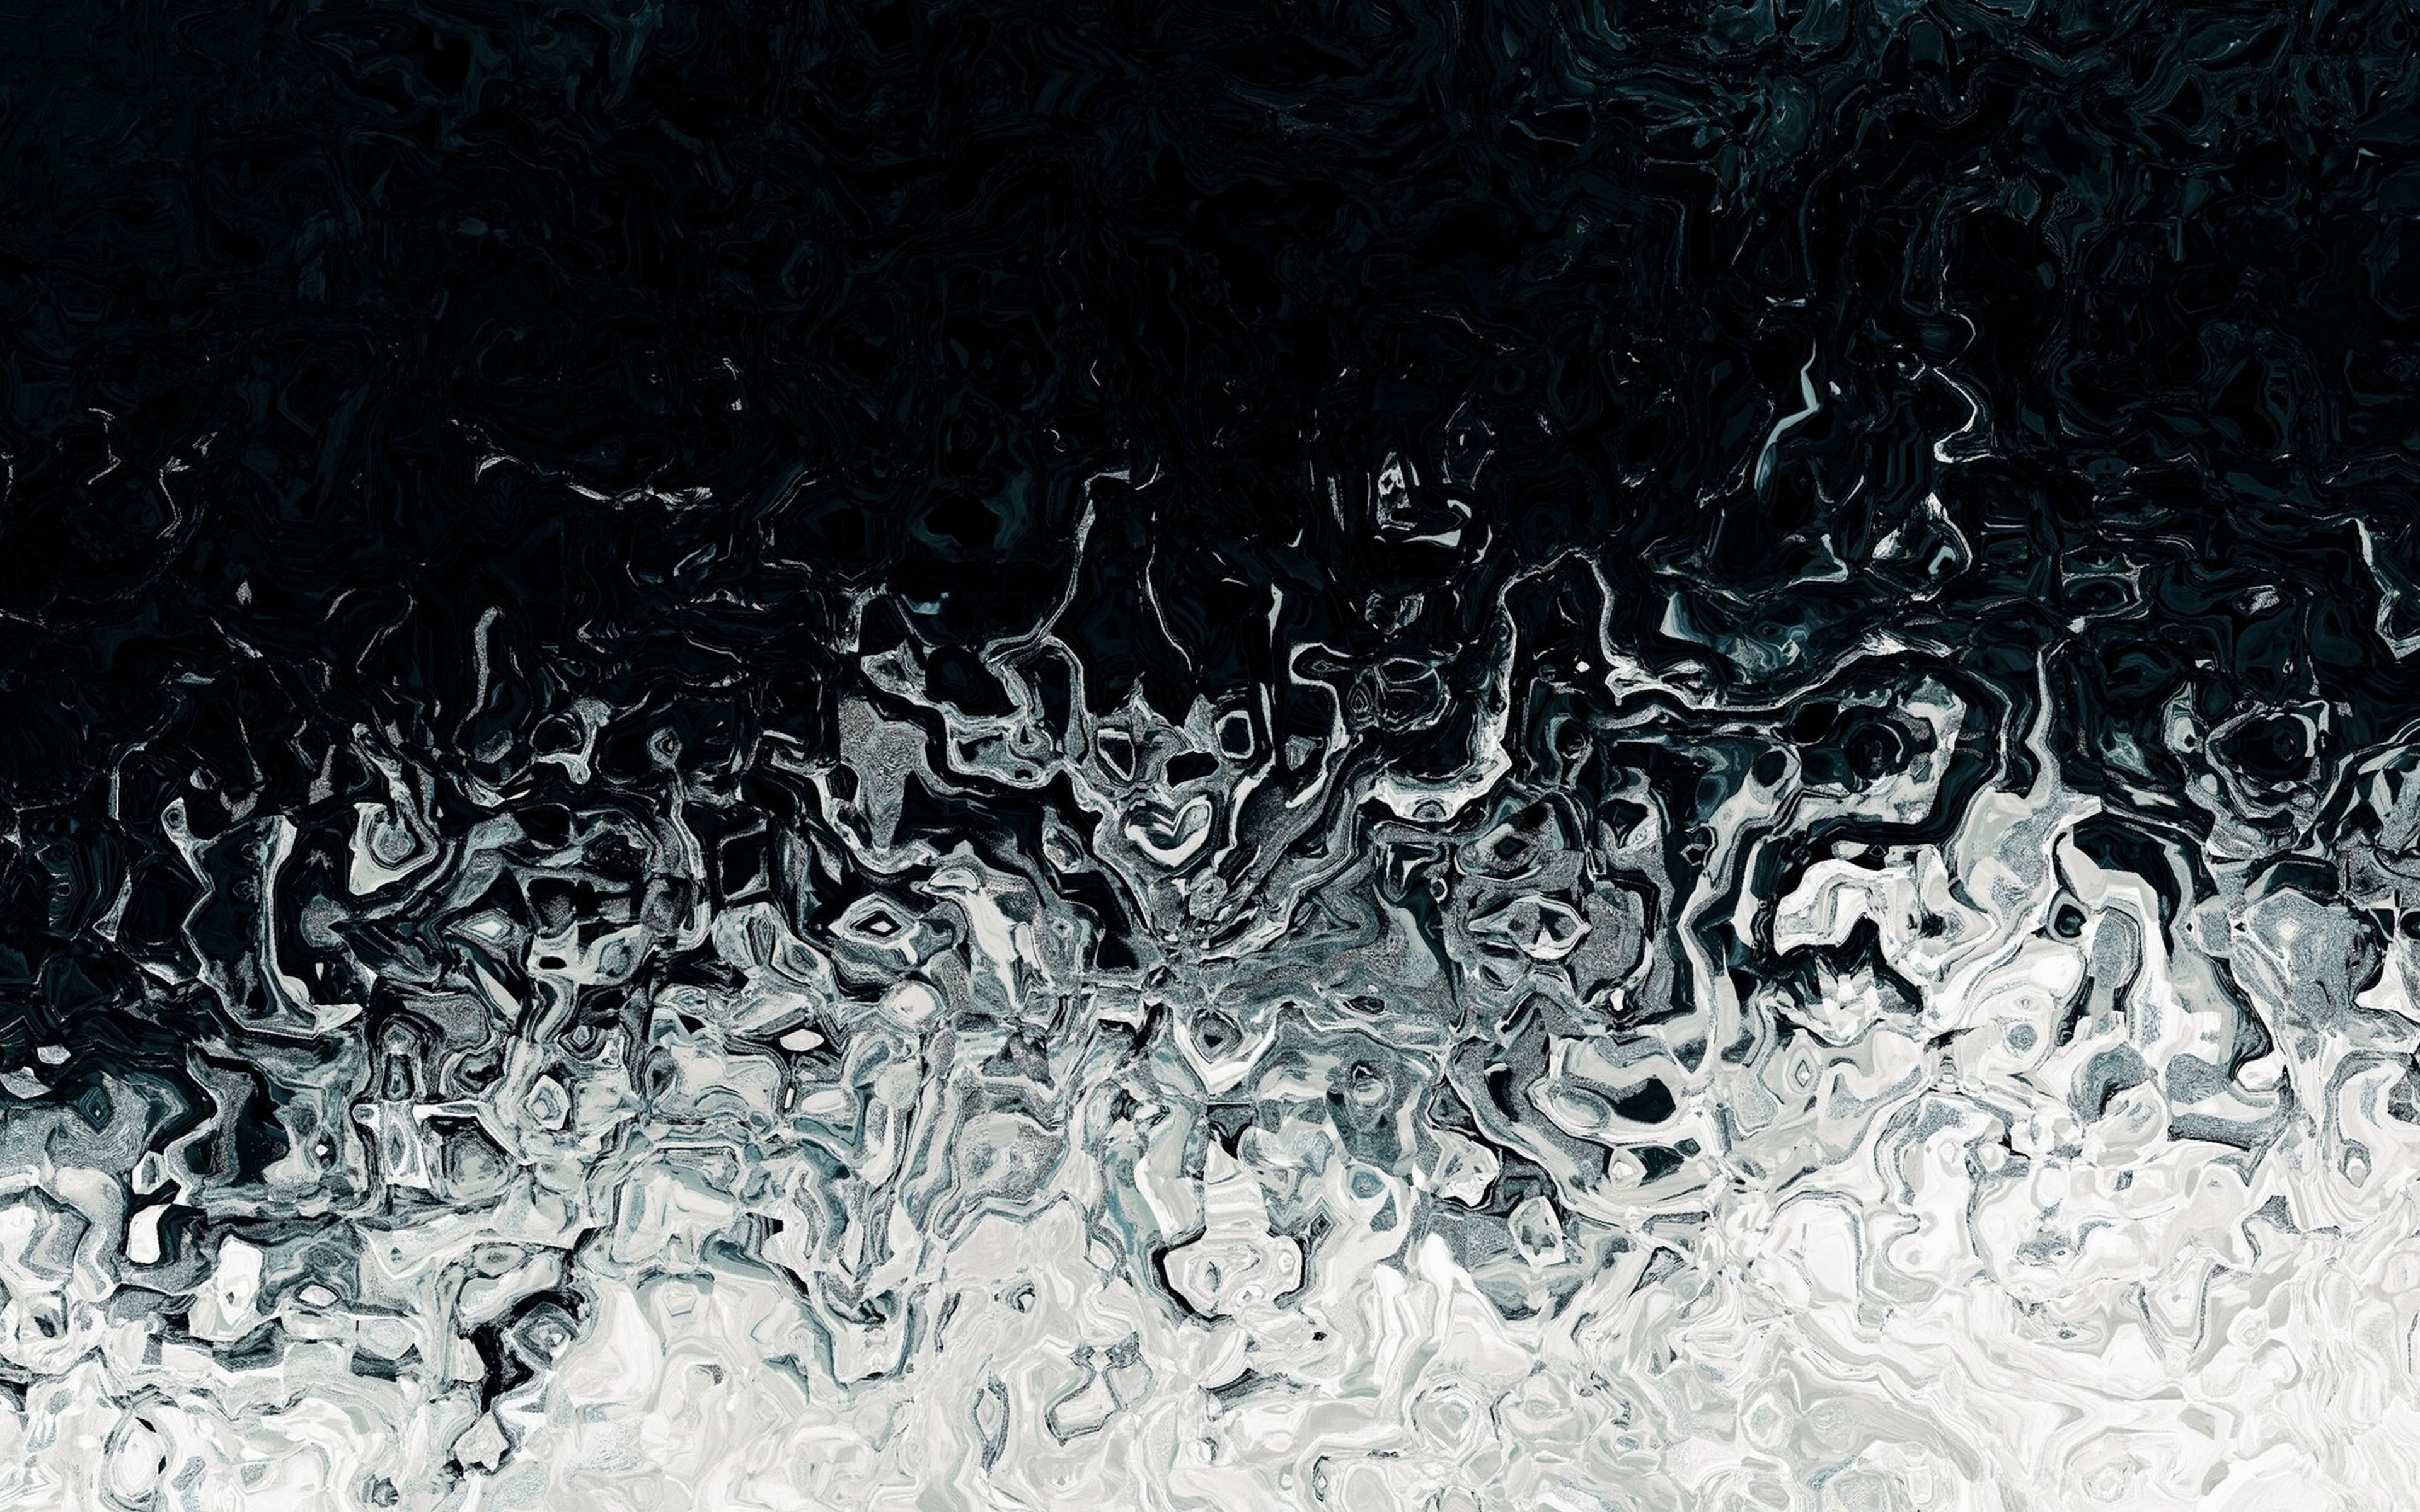 Download wallpaper 3840x2400 stains, liquid, abstraction, black, white 4k ultra HD 16:10 HD background